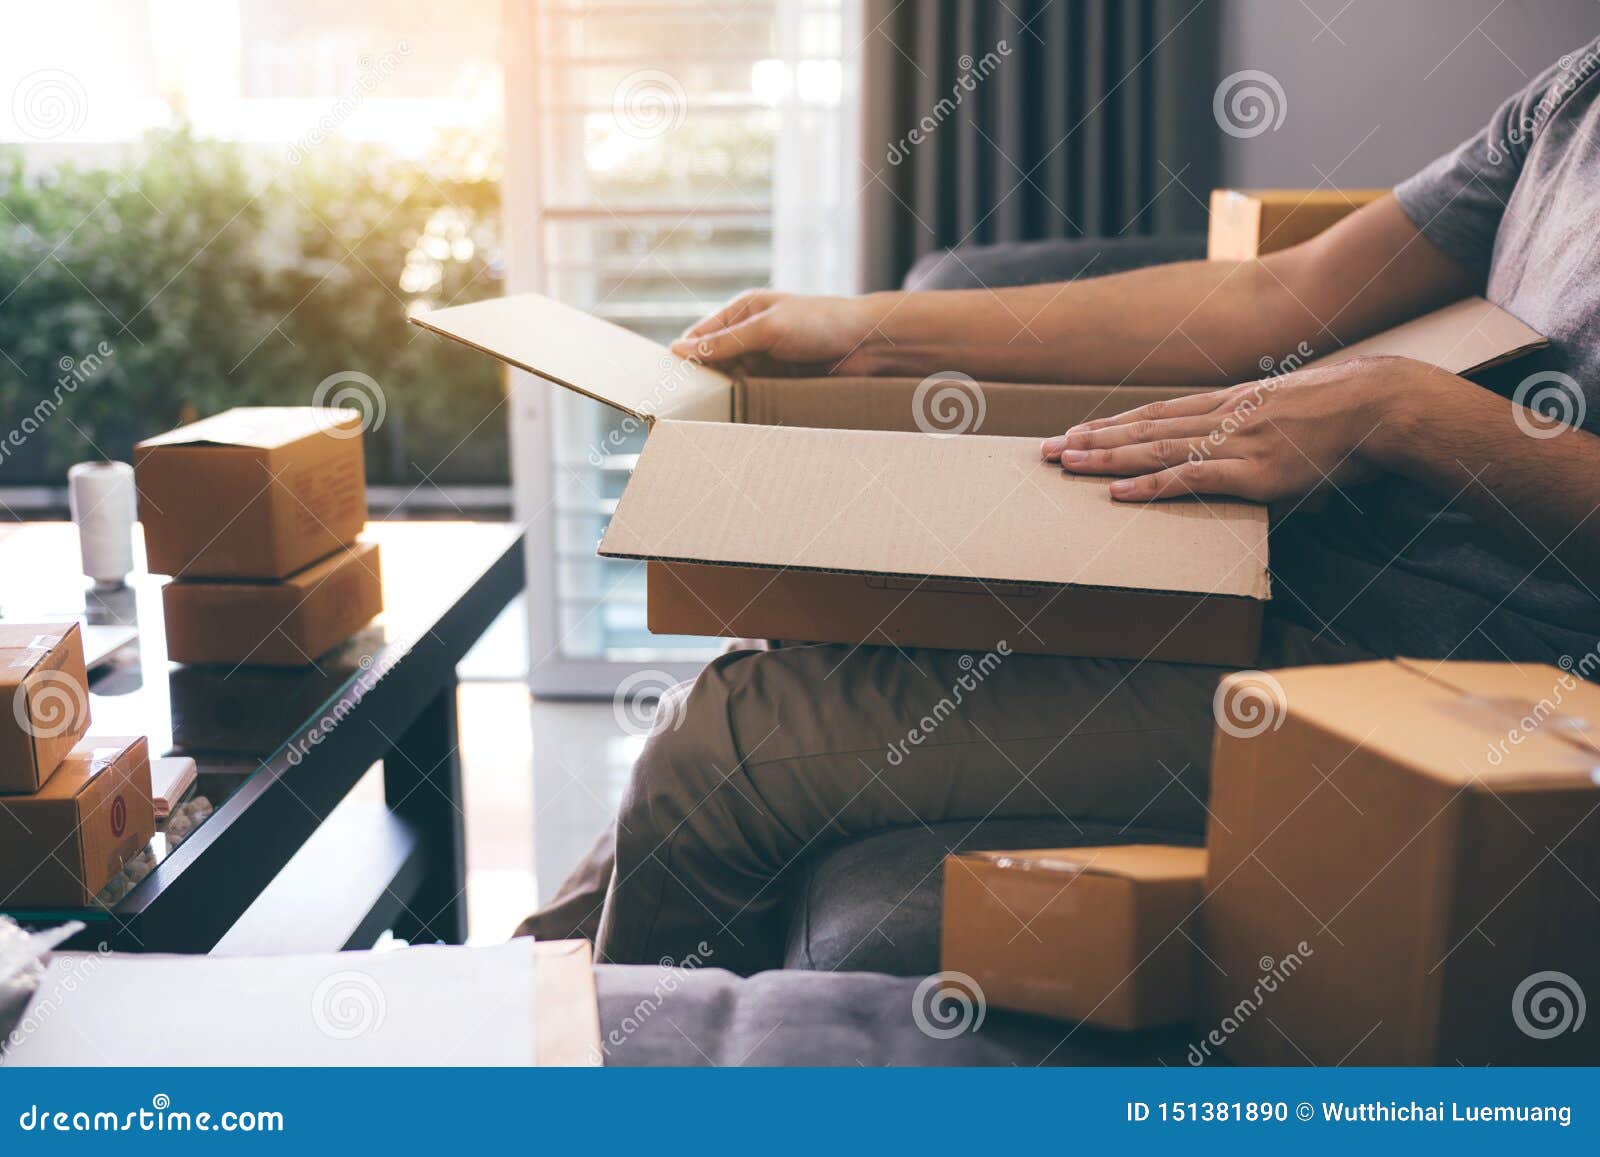 asian entrepreneur teenager is opening a cardboard box in order to put the product that the customer ordered into the box to